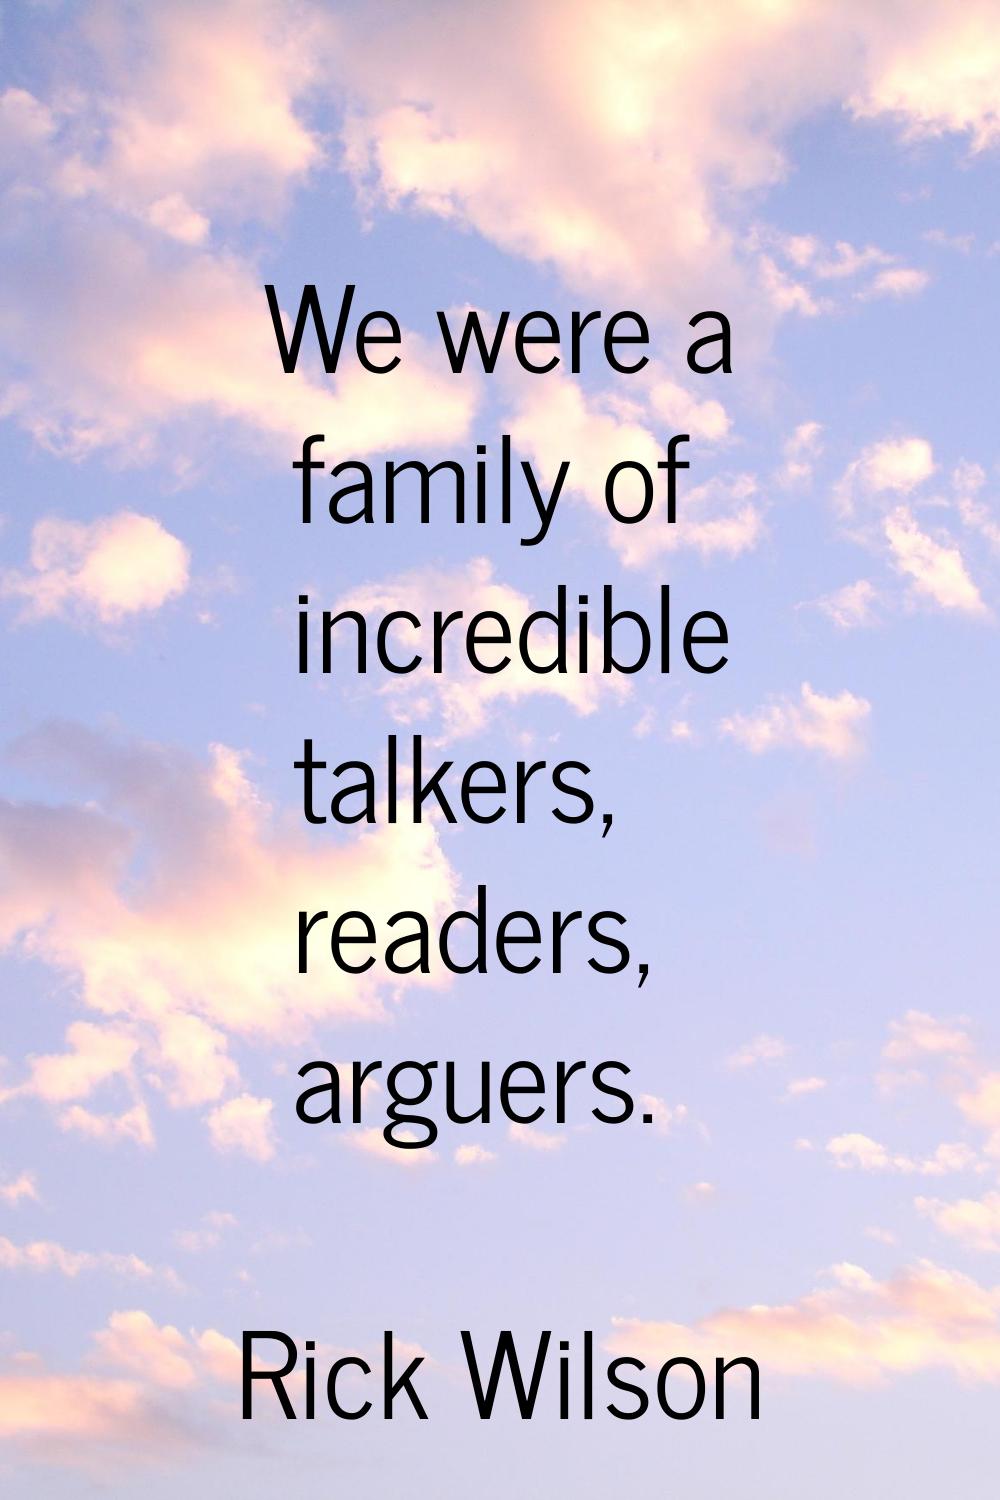 We were a family of incredible talkers, readers, arguers.